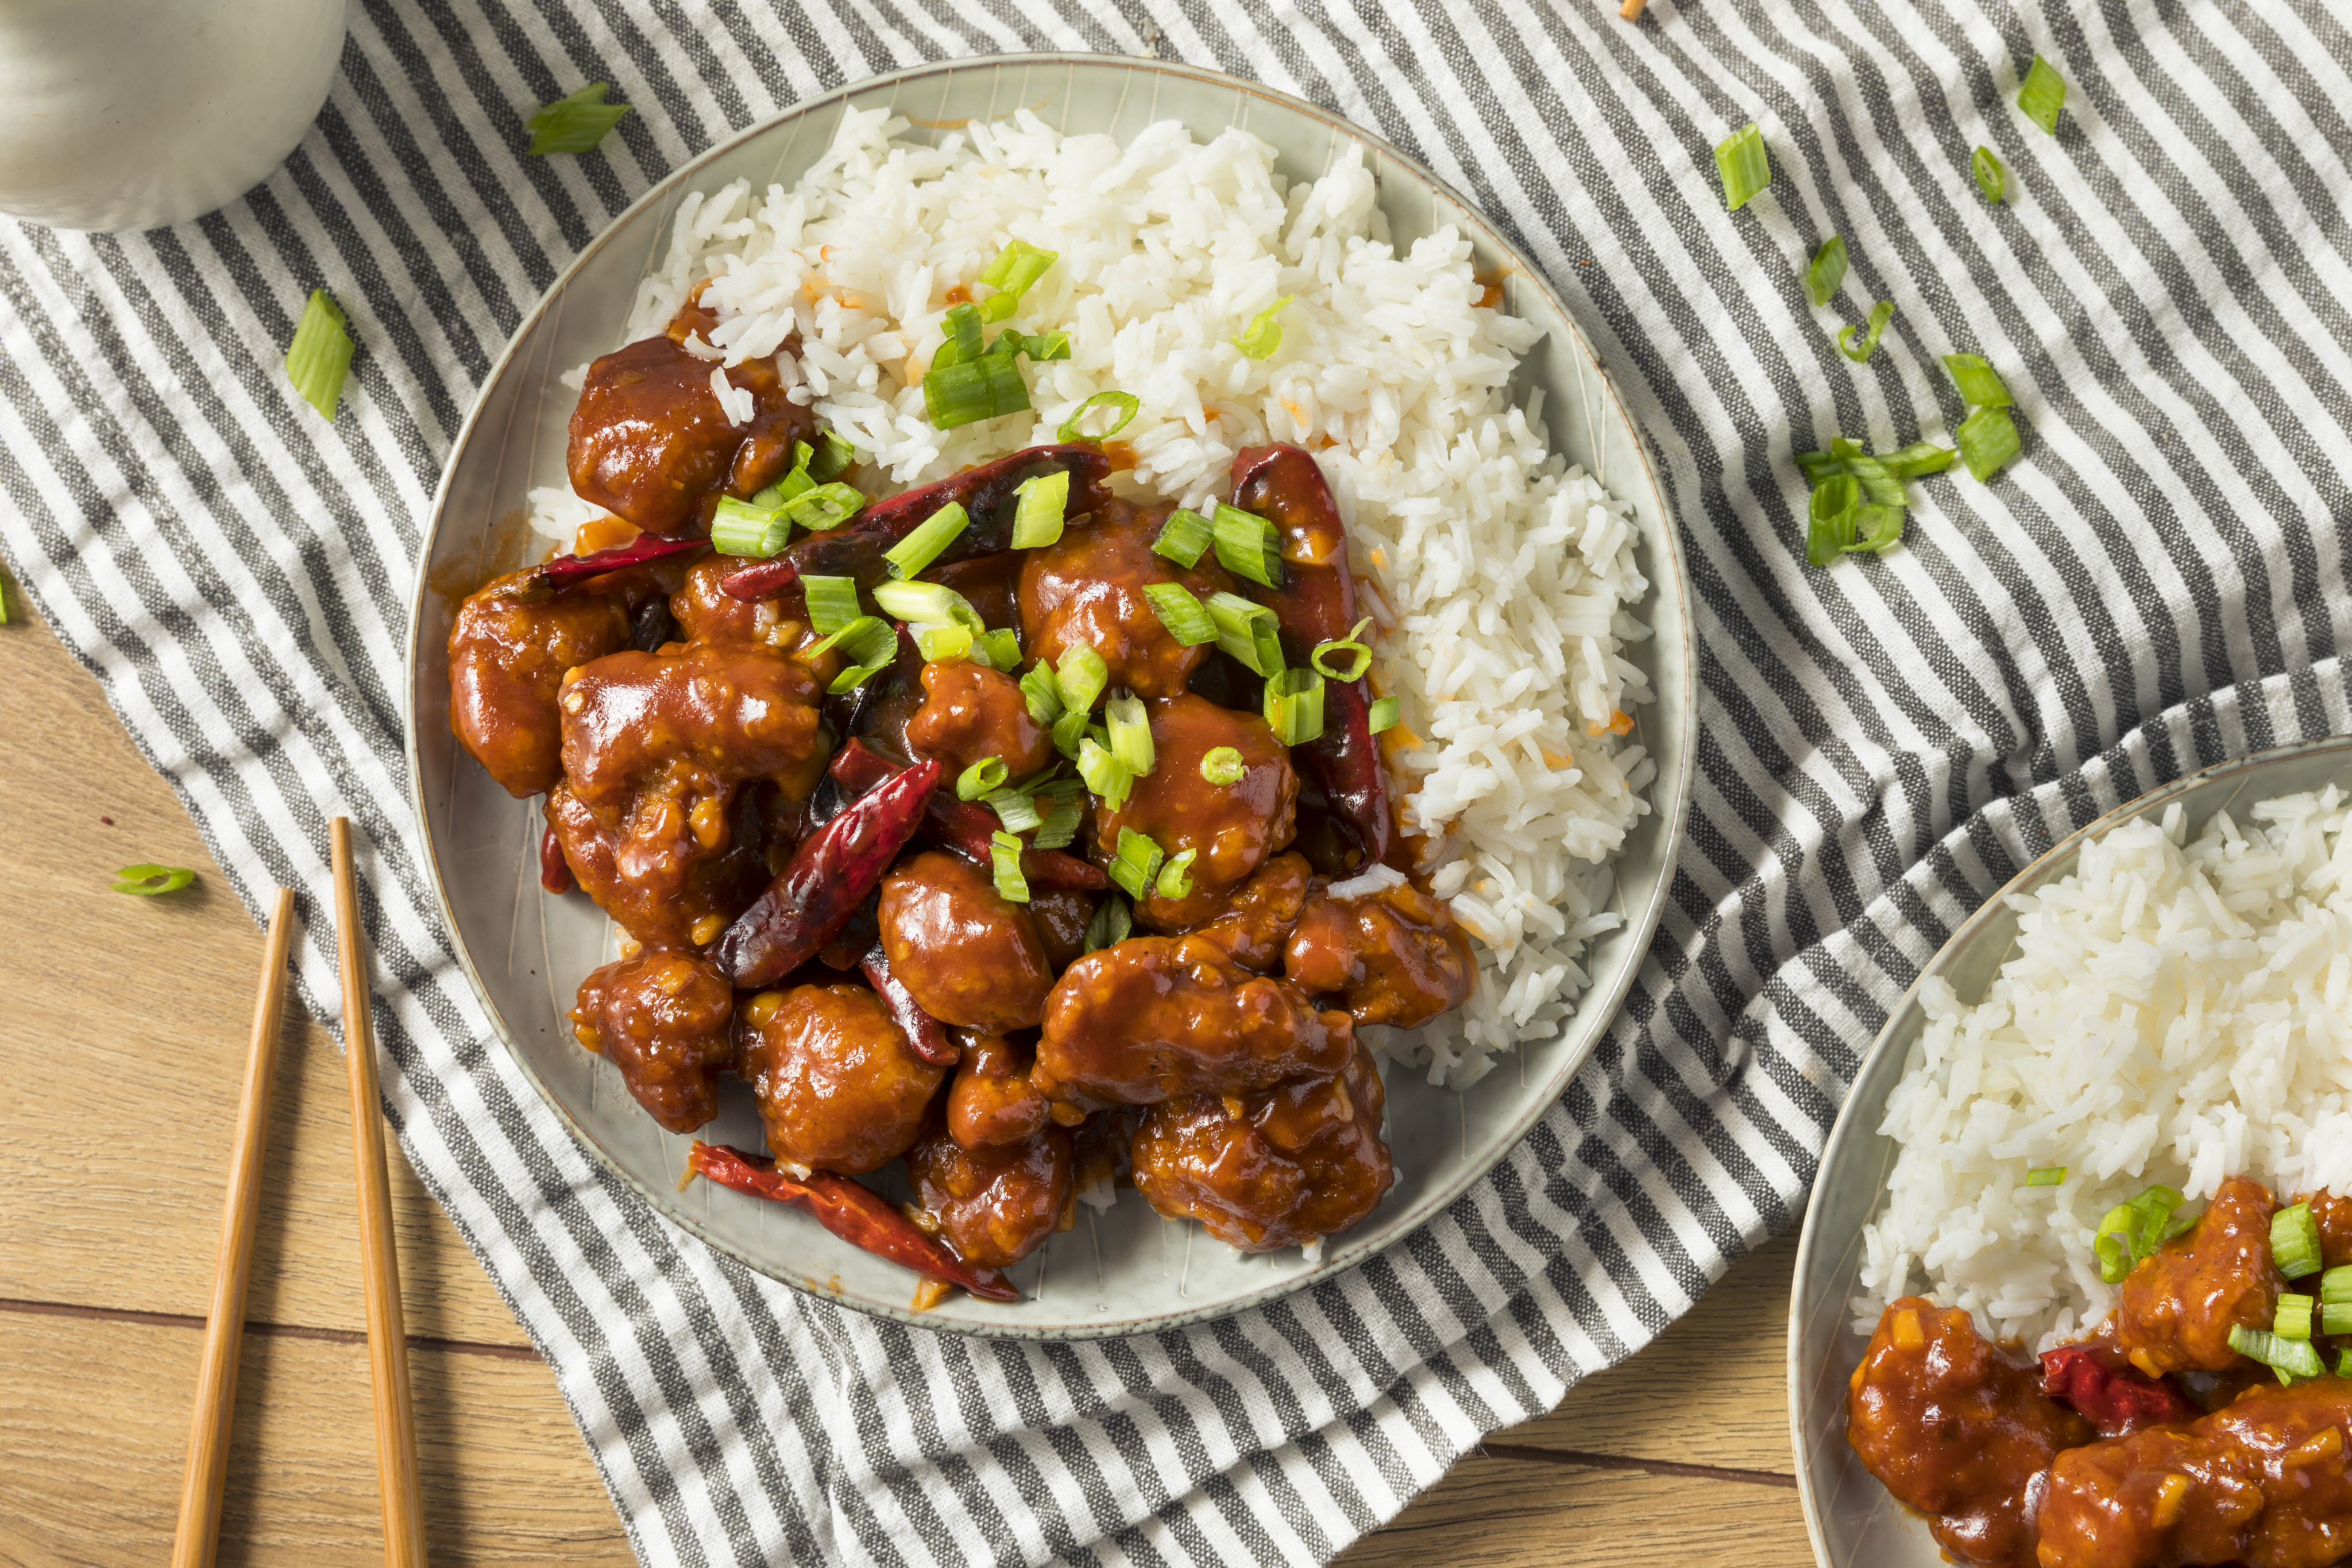 General Tso’s chicken is a classic Chinese-American dish, and columnist Wee Kek Koon enjoyed this and other dishes on a visit to the United States. He has no time for purists who question the eating of “fake Chinese food”. Photo: Getty Images/iStockphoto